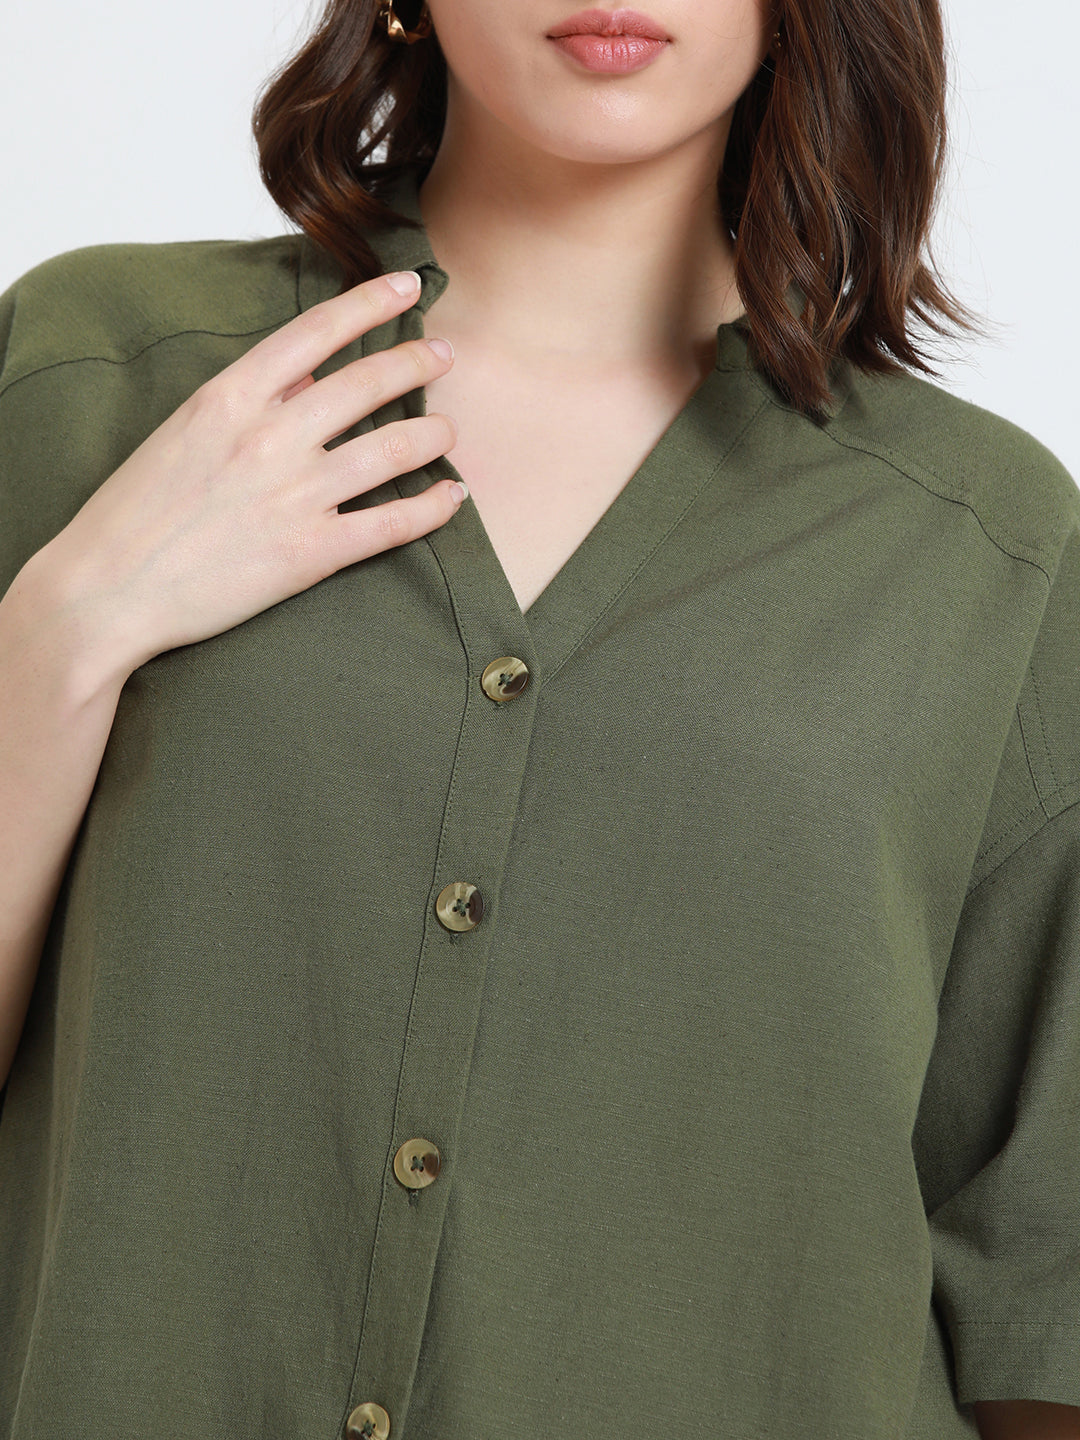 DL Woman Olive Drop-Shoulder Sleeves Cotton Casual Shirt